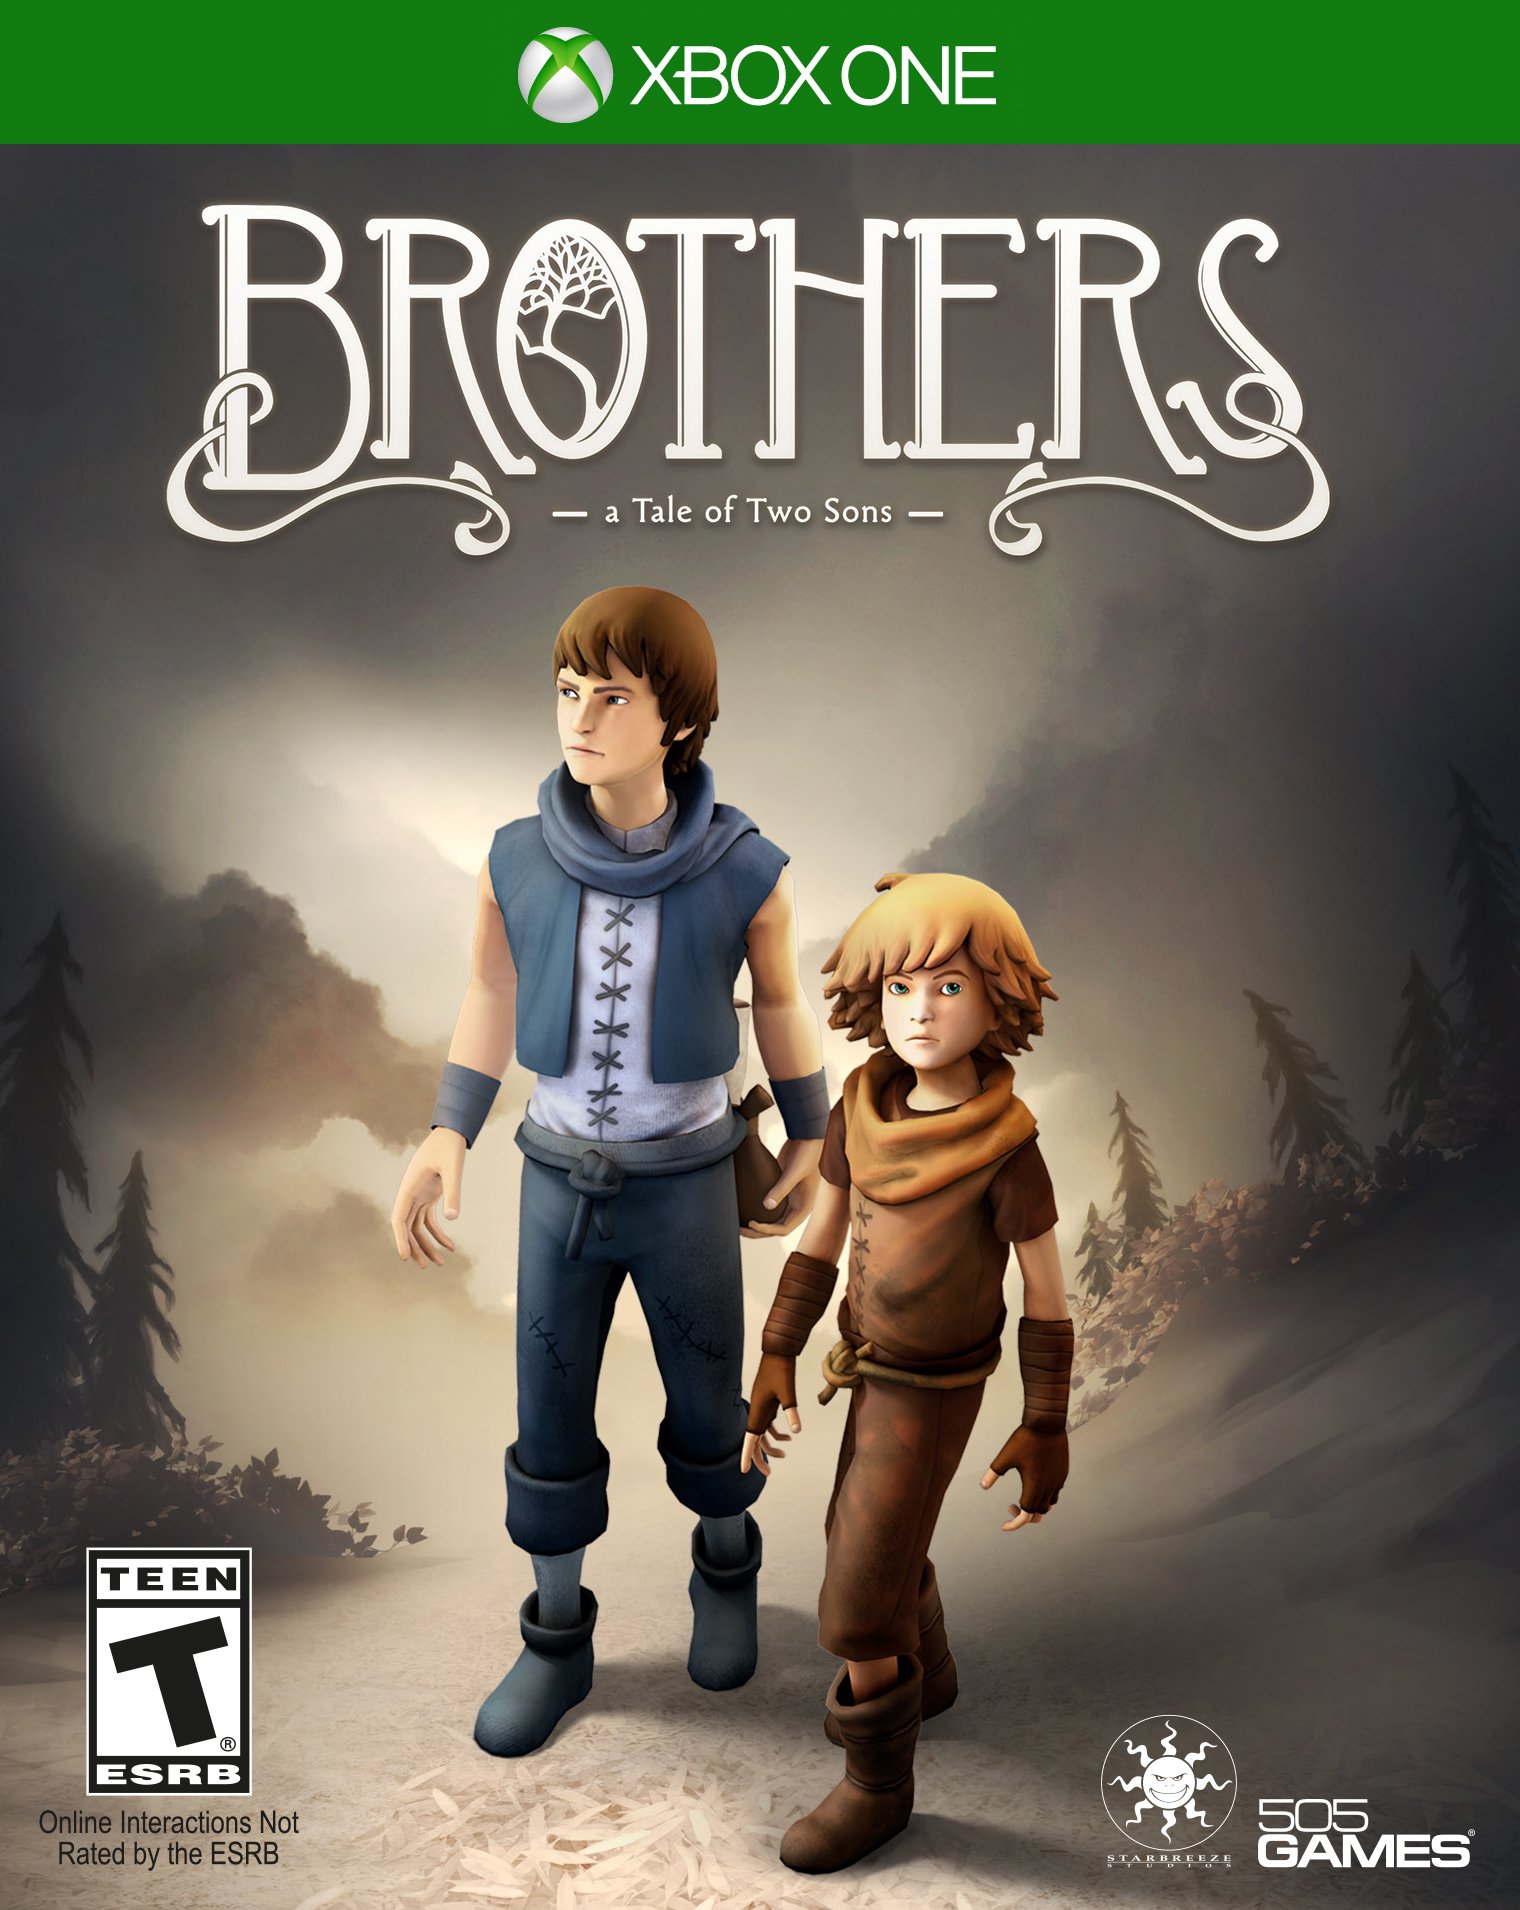 Brothers - Xbox One